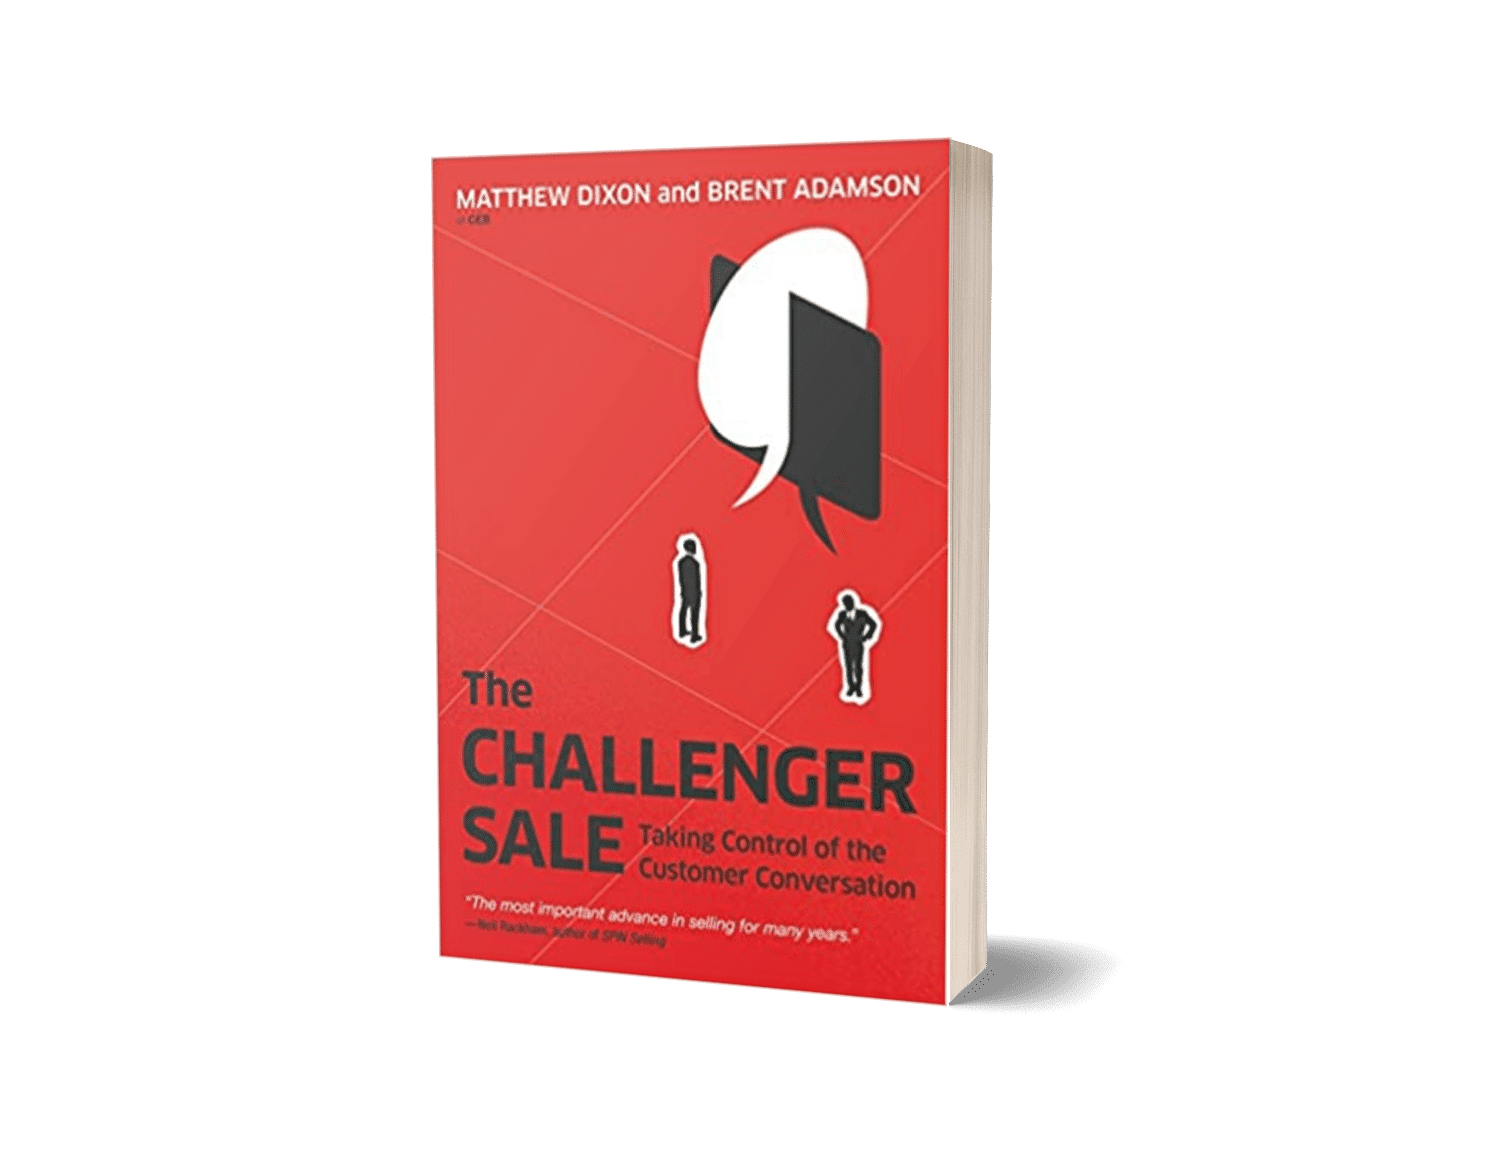 a great sales book is The Challenger Sale